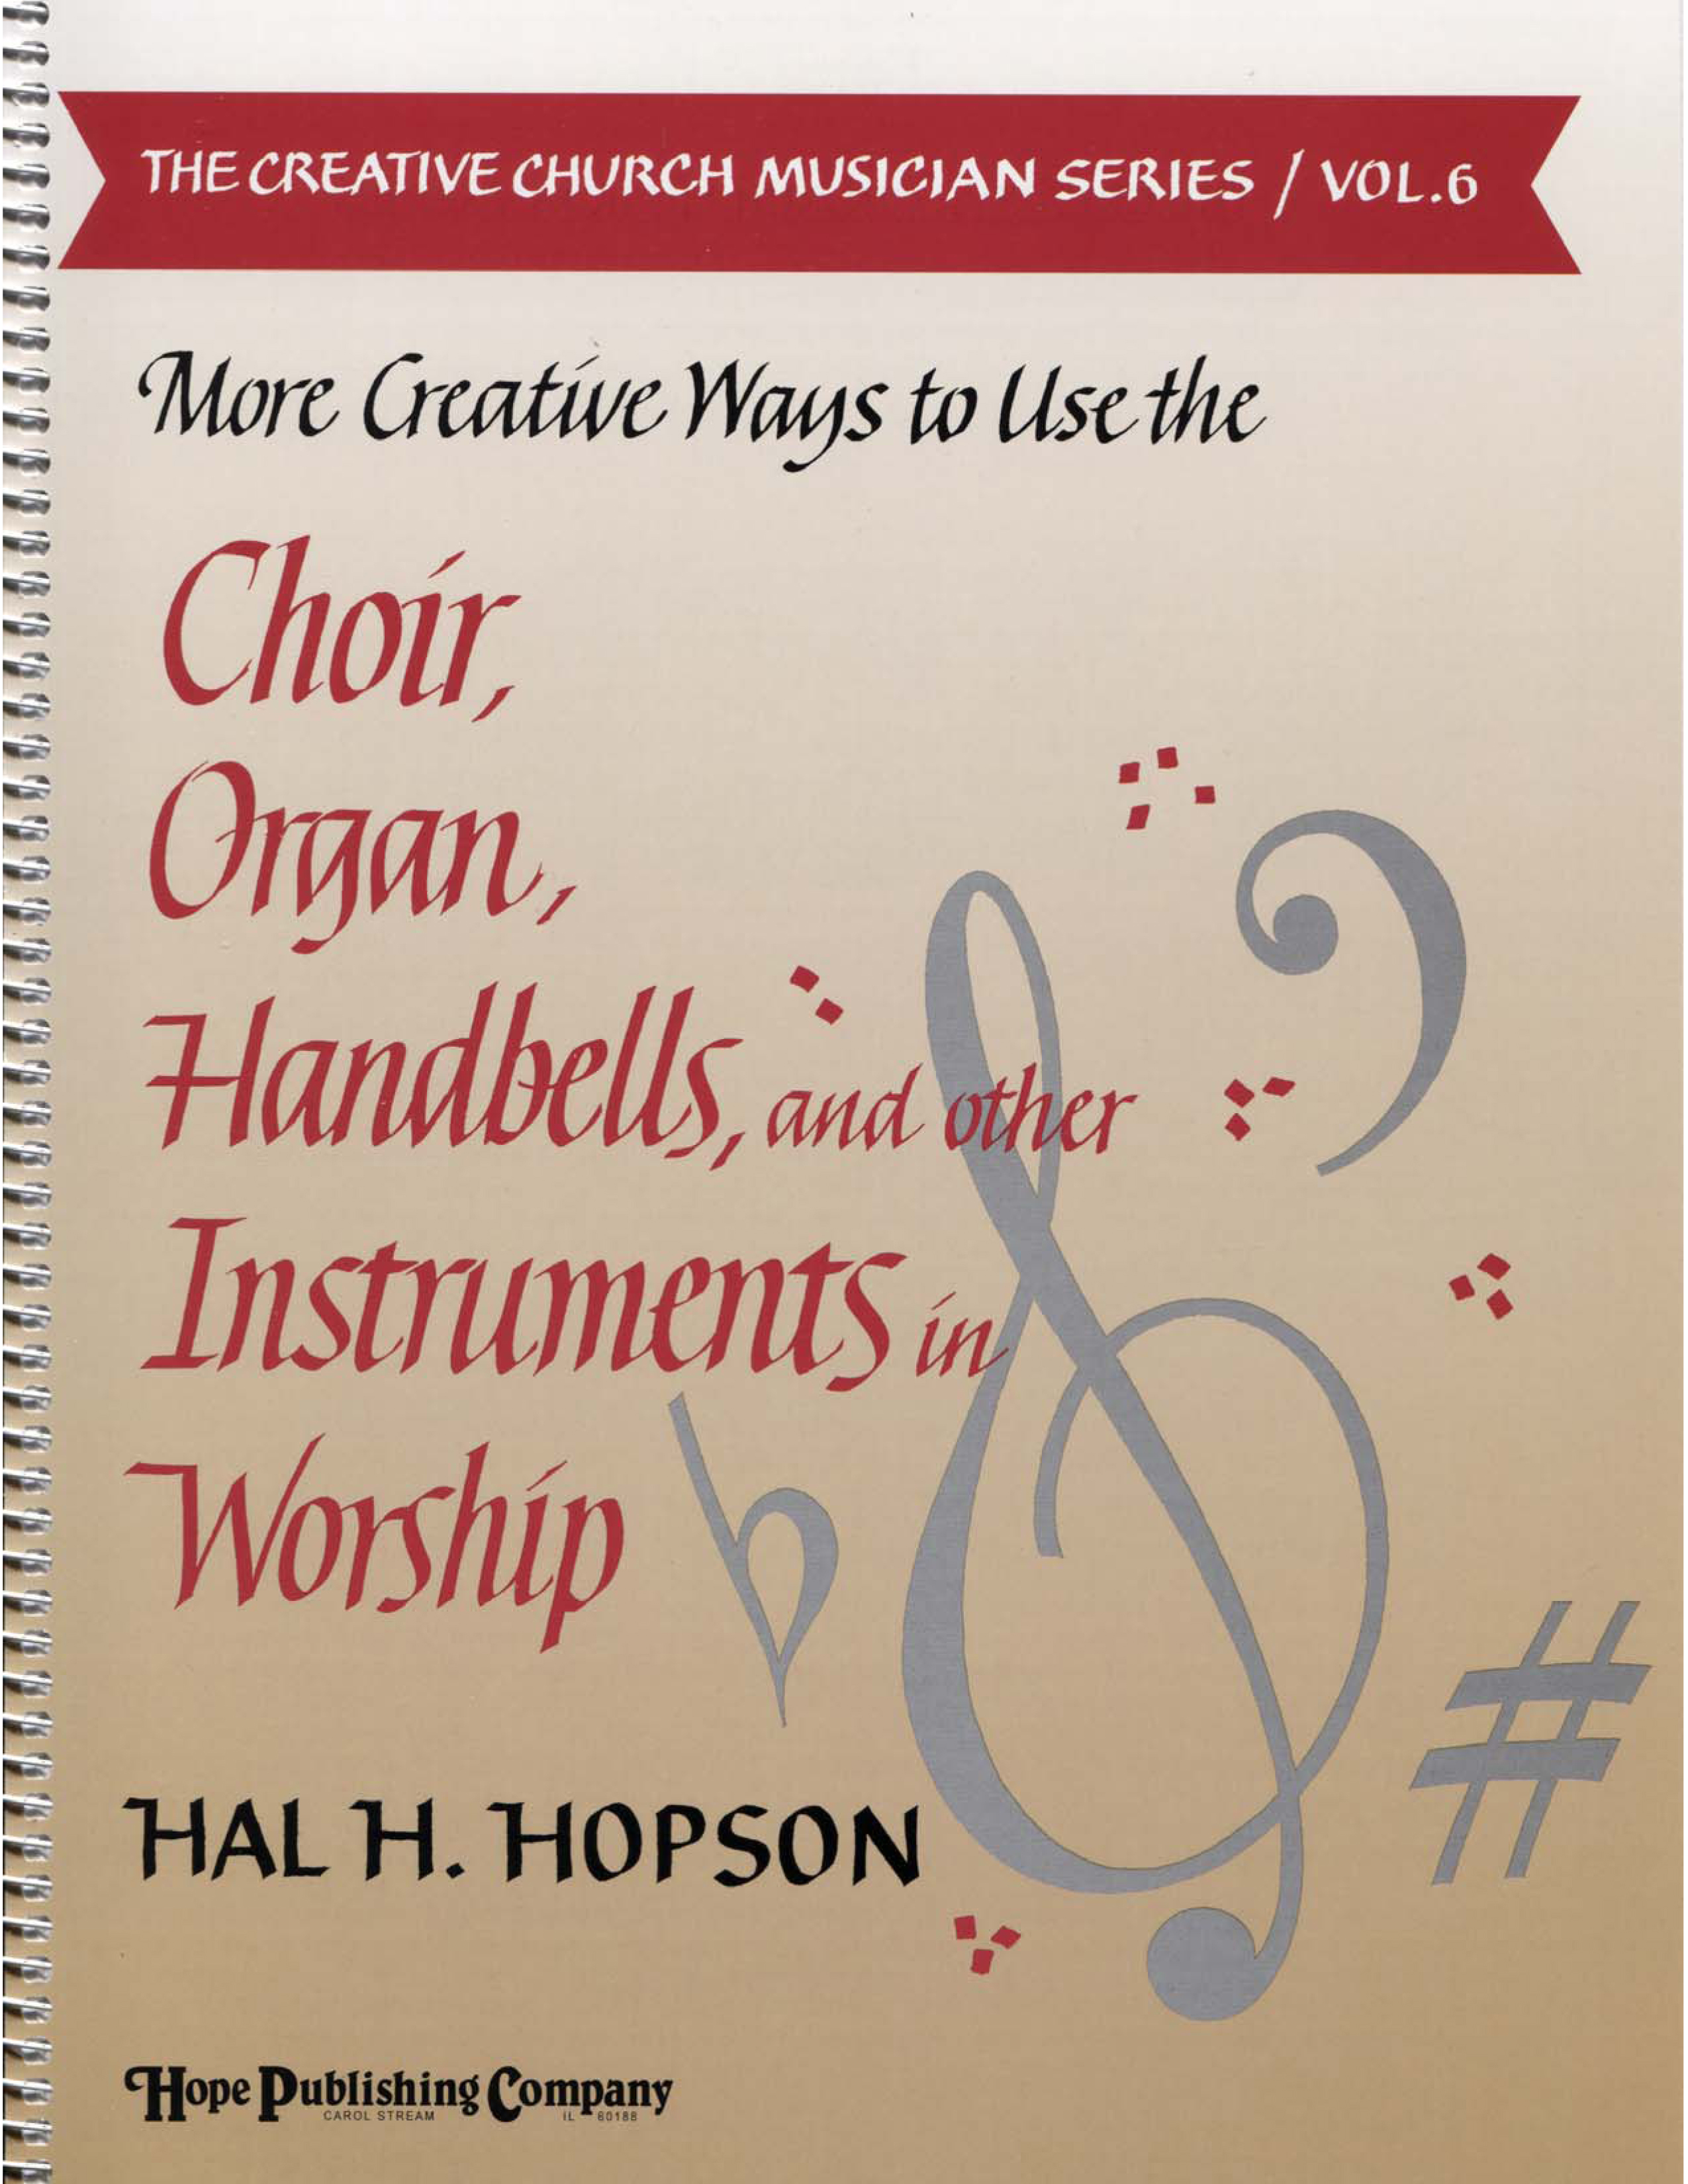 More Creative Ways to Use the Choir Organ Handbells and Other Instruments (V-D Cover Image